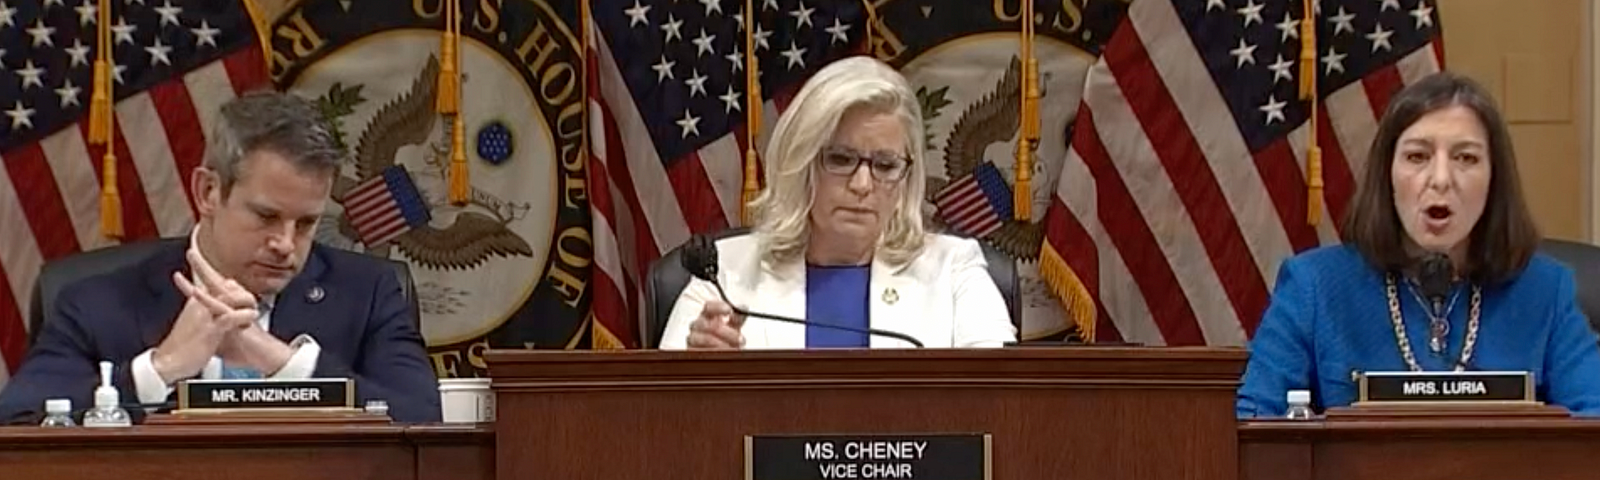 Reps. Adam Kinzinger, Liz Cheney and Elaine Luria direct the eighth congressional hearing into the Jan. 6, 2021 insurrection at the U.S. Capitol.